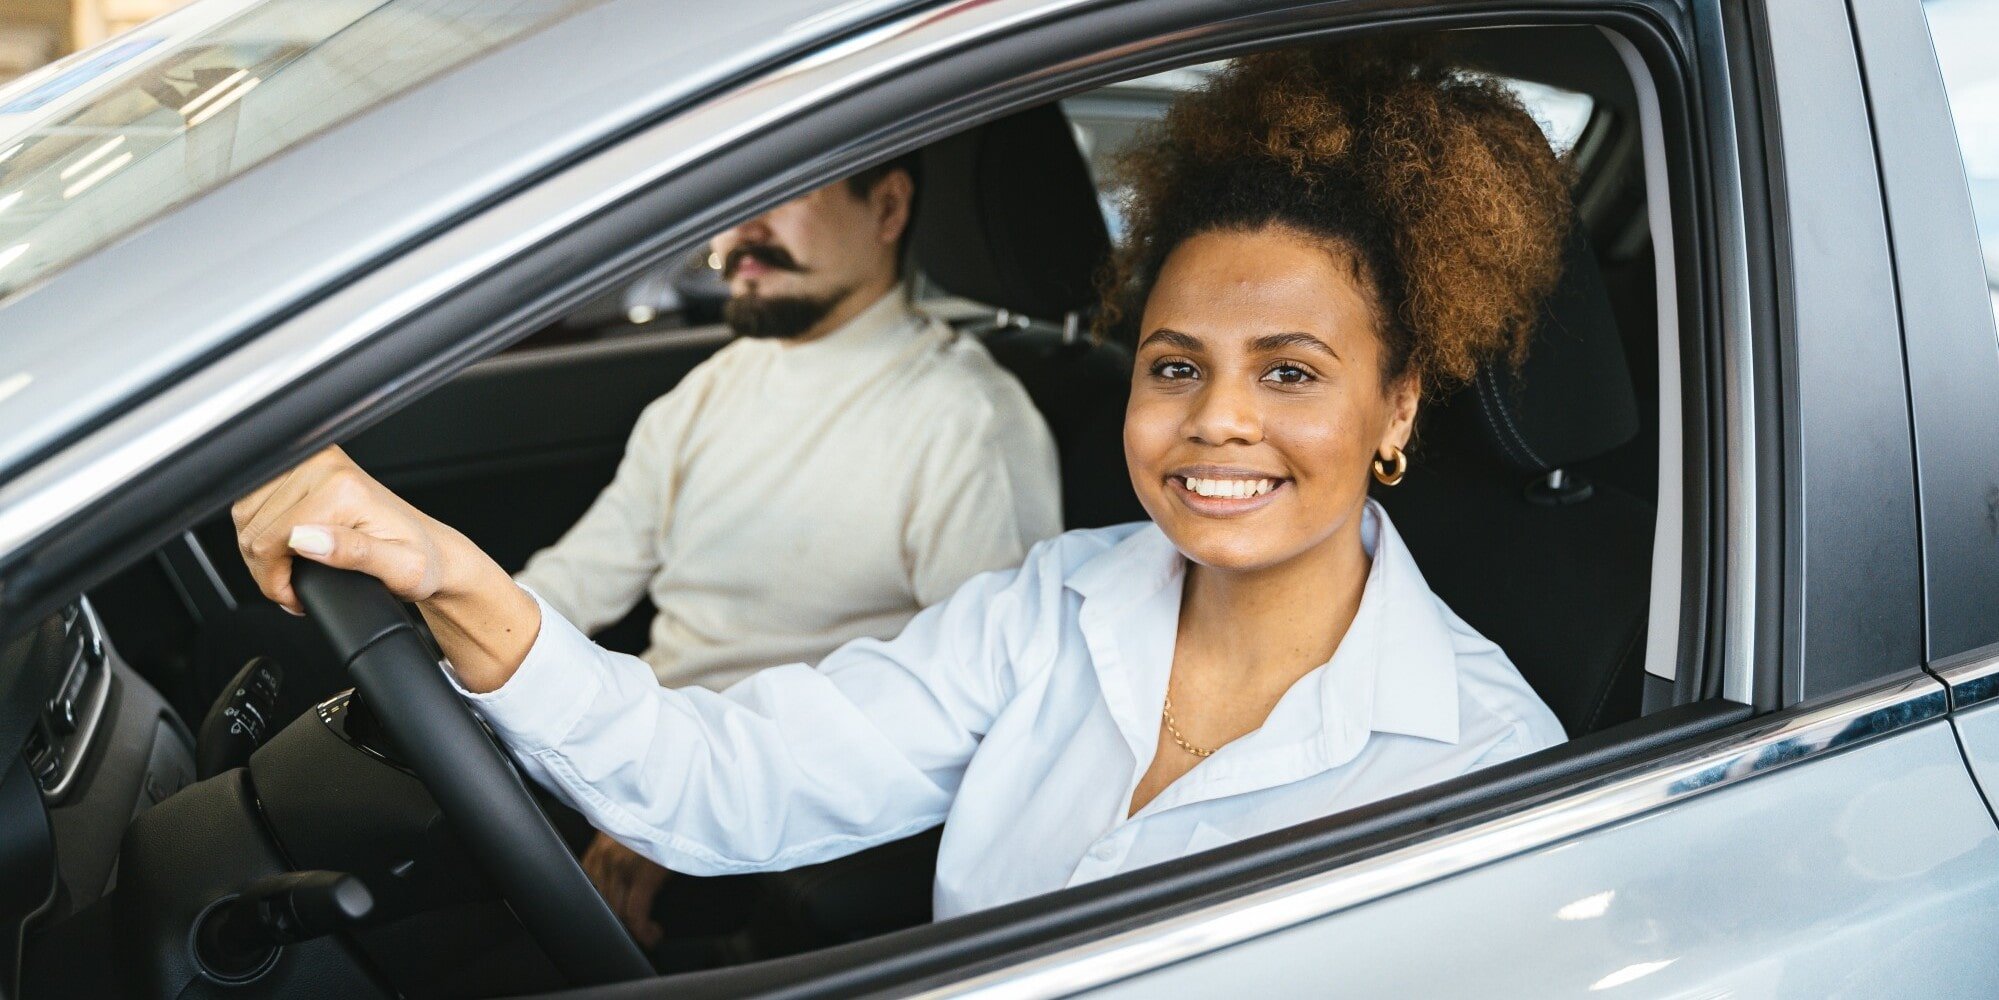 Woman driving car and smiling